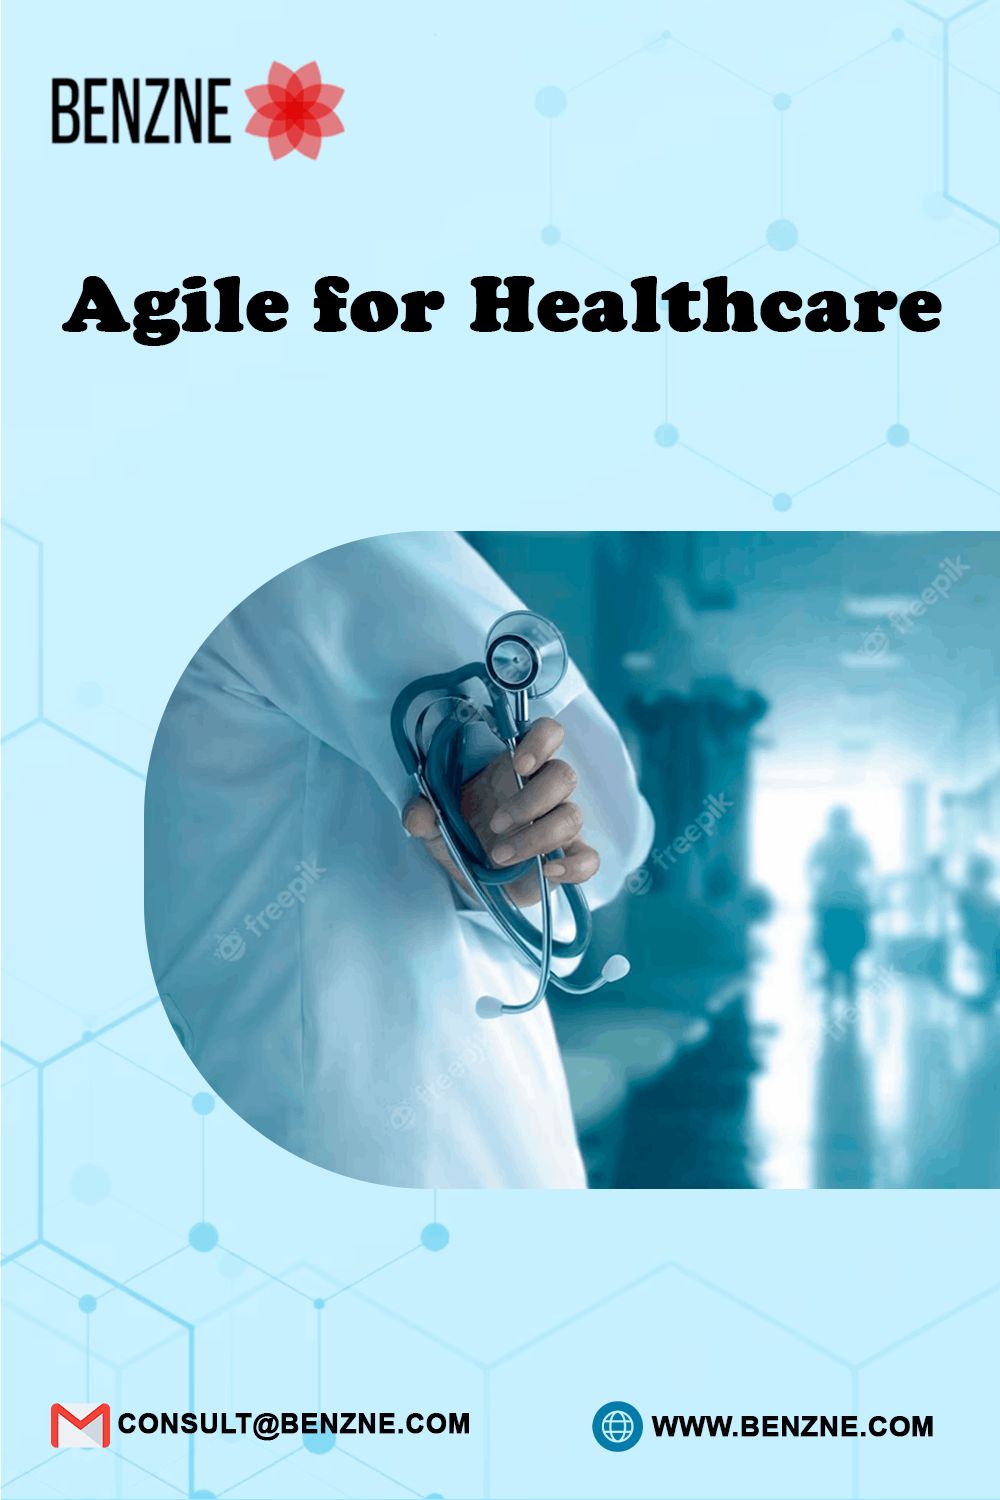 Agile For Healthcare With Benzne Consulting: To Enhance The Healthcare Sector